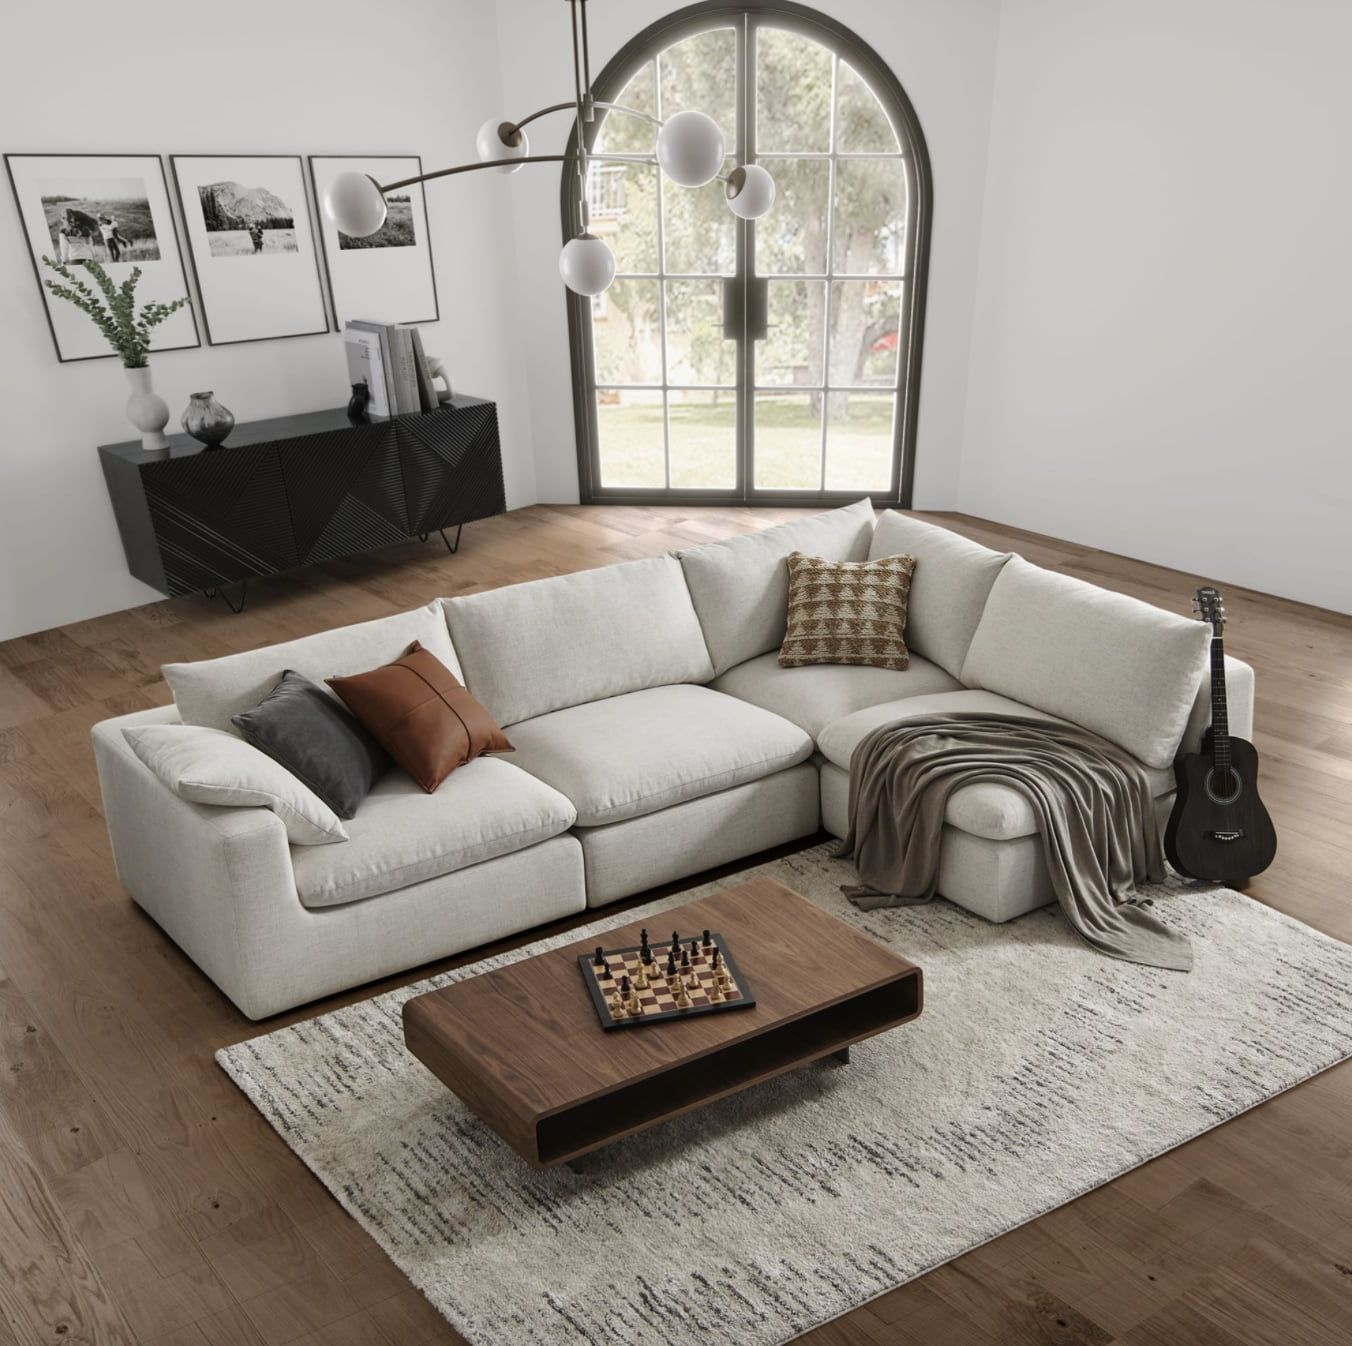 Living Room Furniture For Large Families 2022 | Popsugar Home Regarding Sectional Couches For Living Room (View 11 of 20)